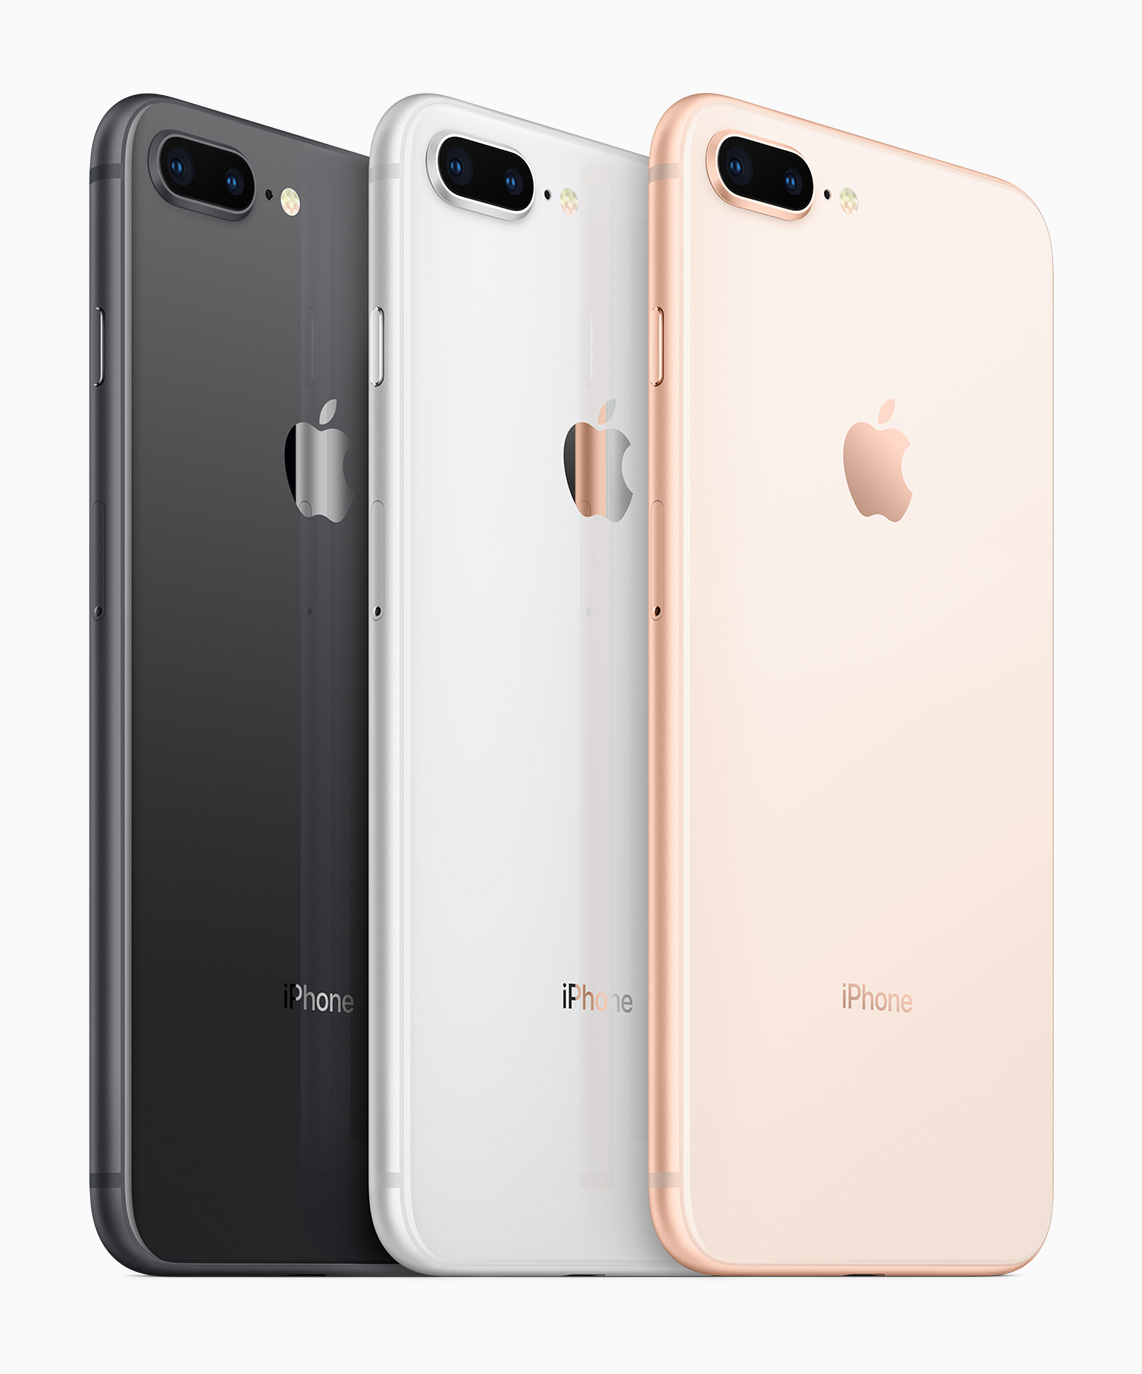 Apple Announces the iPhone 8 and iPhone 8 Plus